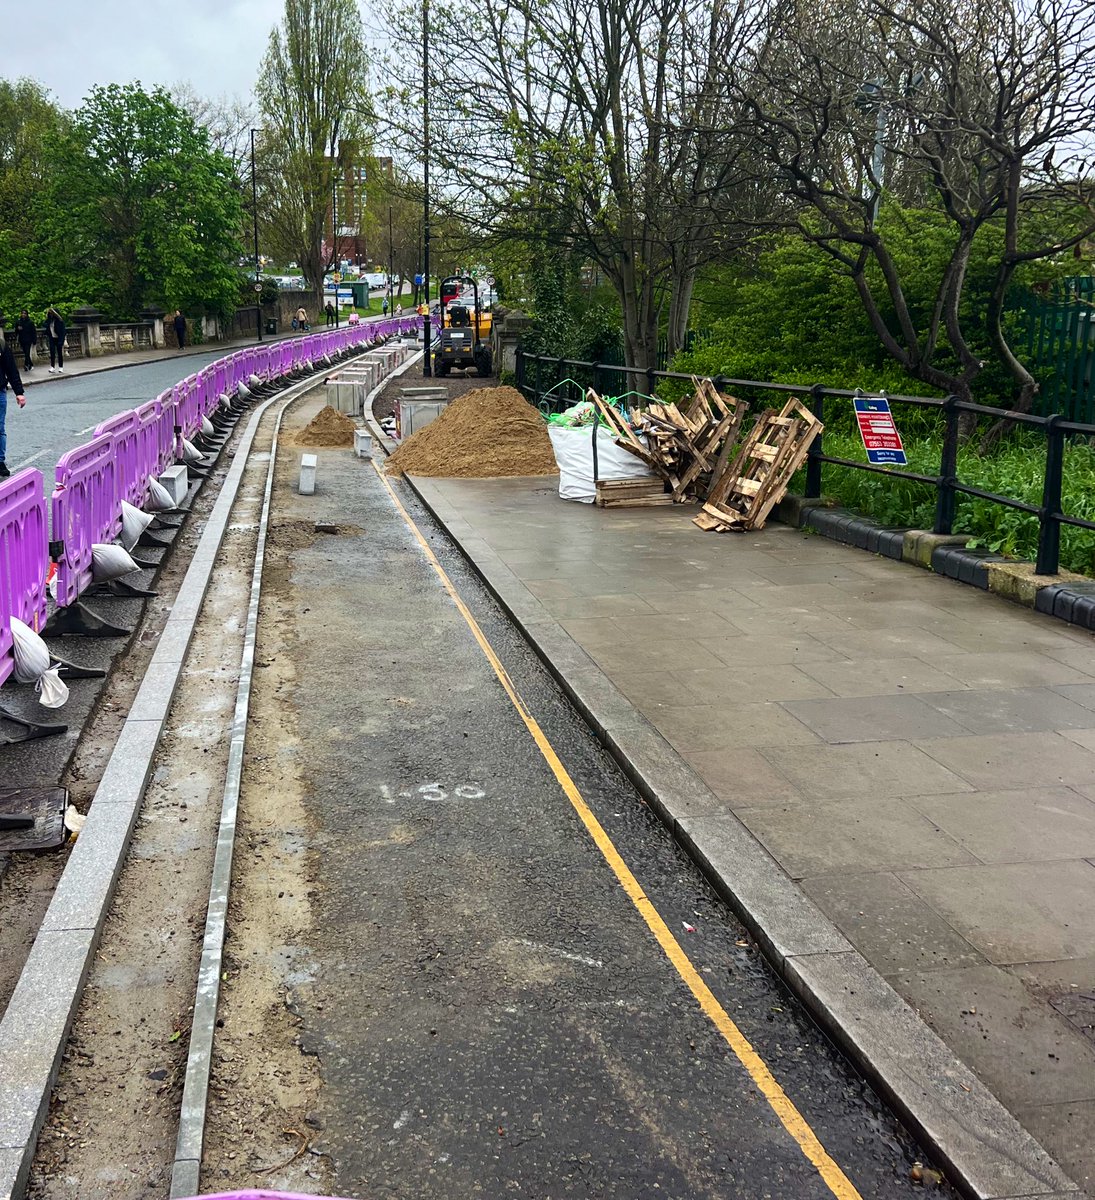 Work well underway in Hanwell to deliver on our promises for safe and segregated cycle infrastructure. Lots more to come too, with £28m committed in this coming year alone for better pavements, cycle routes, road surfacing and much, much more: orlo.uk/nhRWm